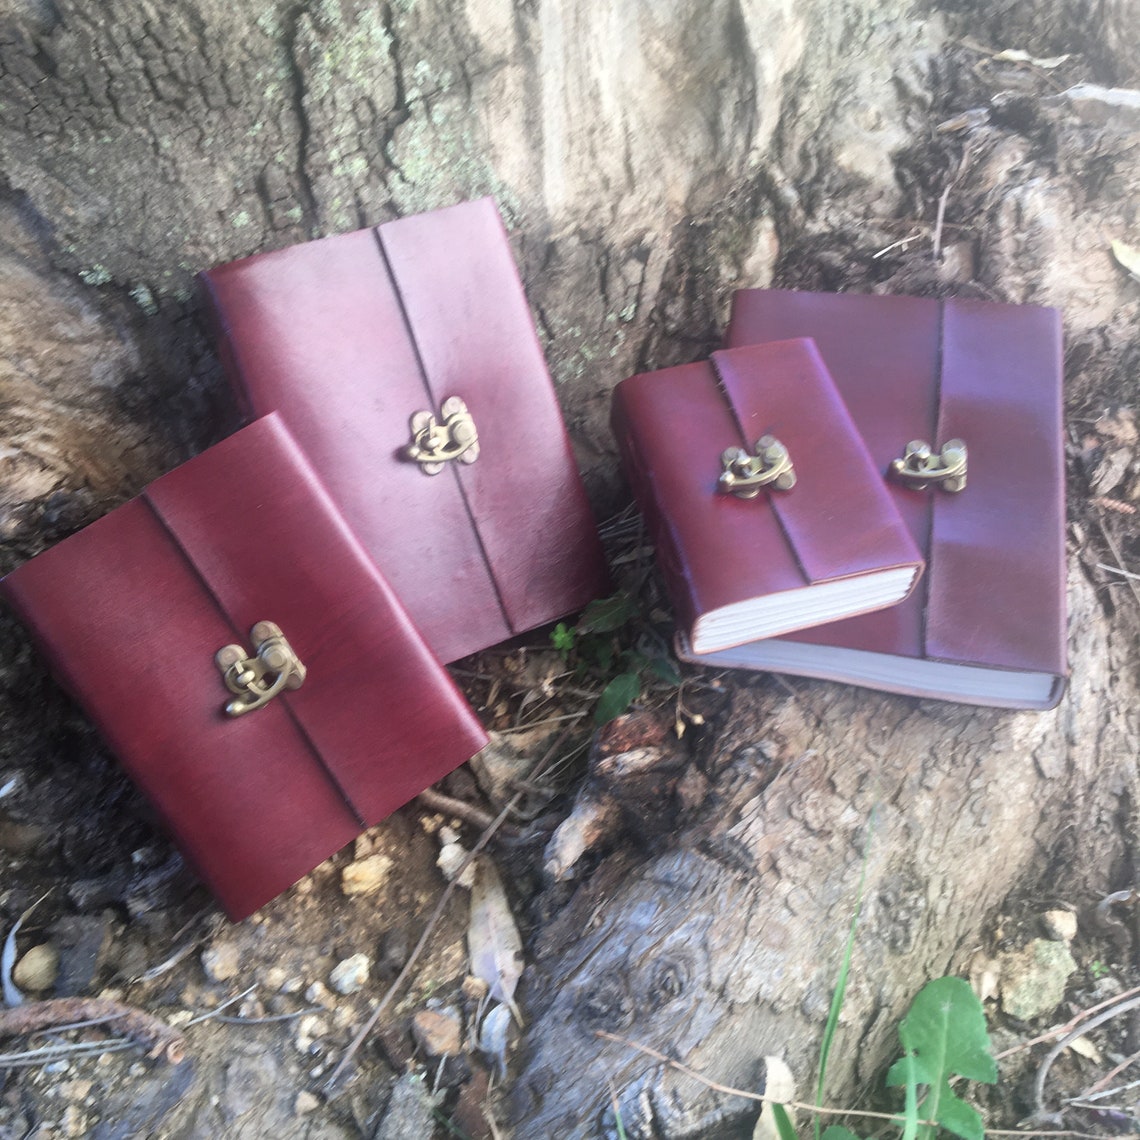 leather bound travel journal